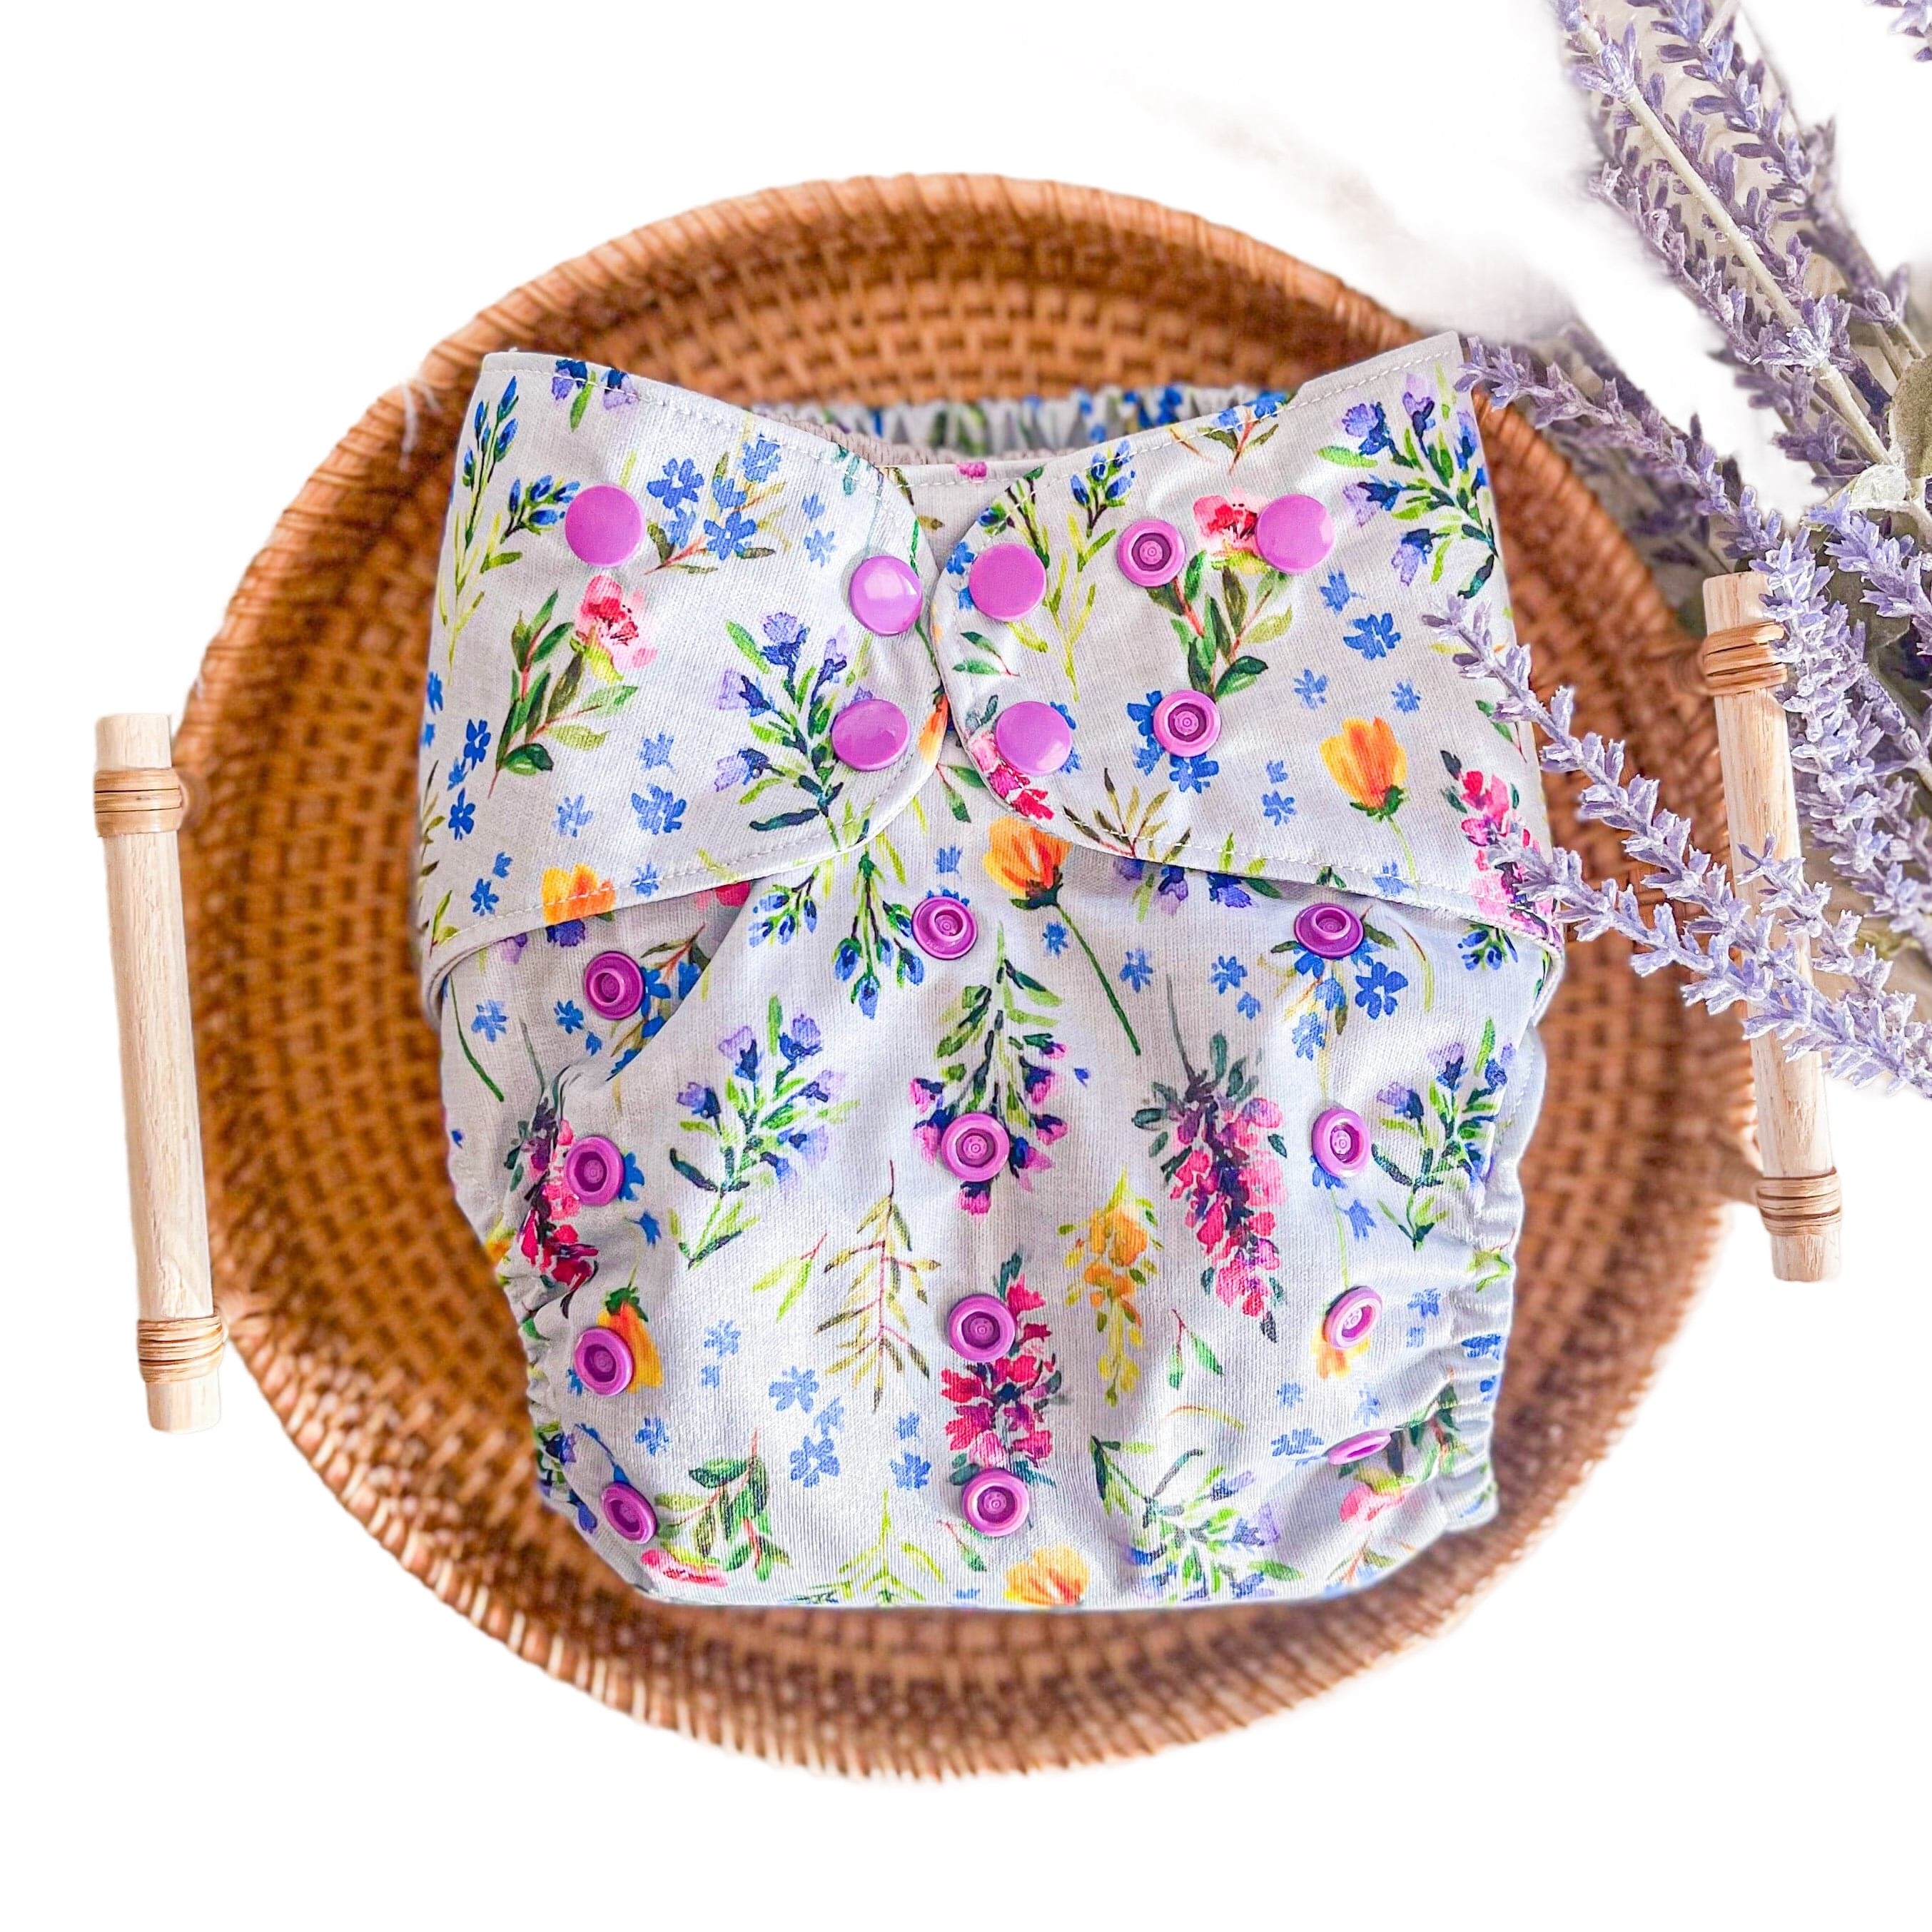 The "grande" Pocket Diaper By Happy Beehinds - Creative Collection